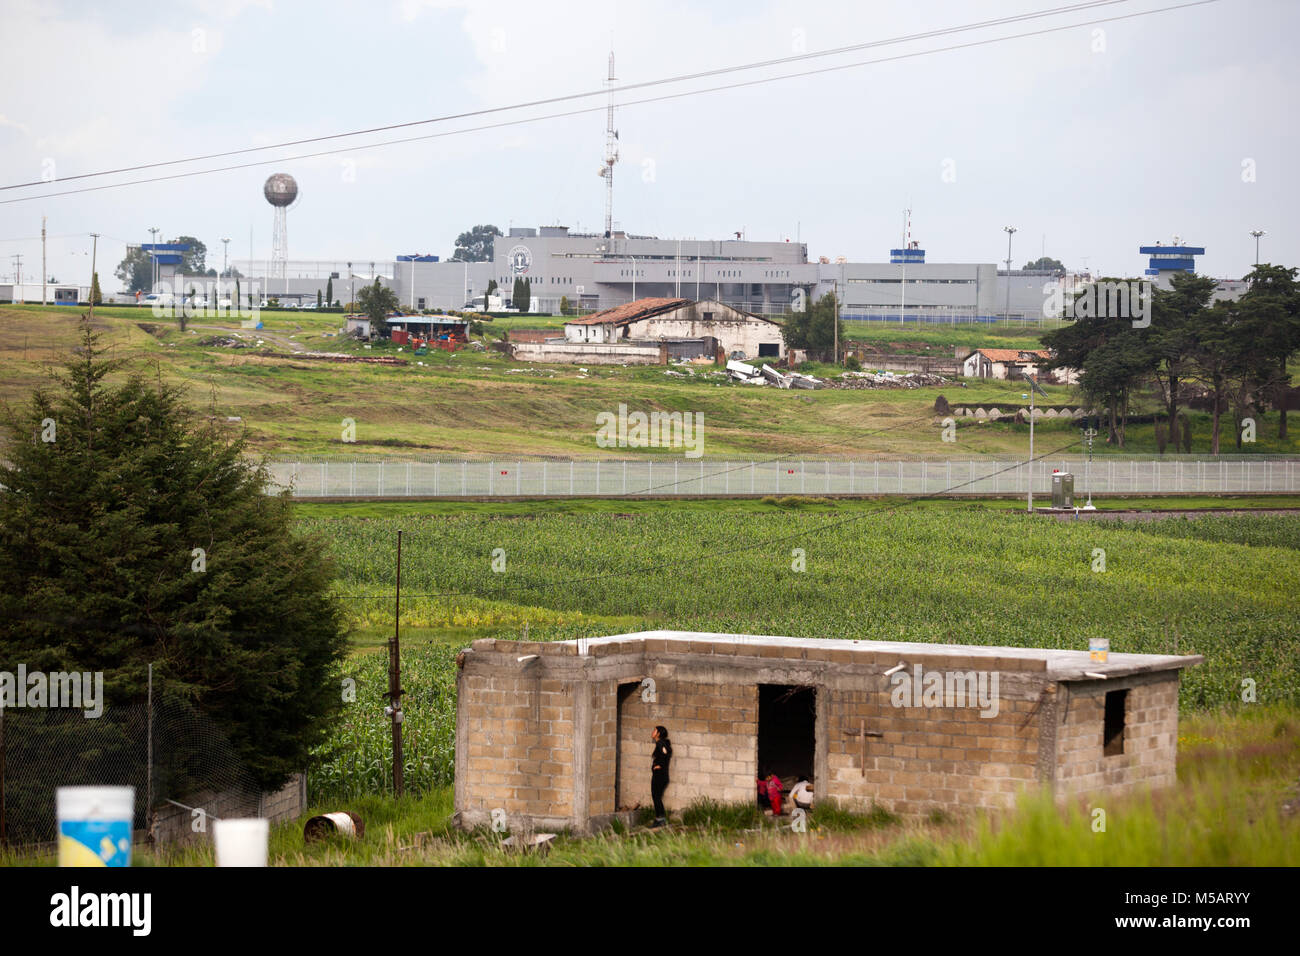 The Altiplano prison from which Joaquin "El Chapo" Guzman escaped near Toluca, Mexico on Wednesday, July 15, 2015. The notorious cartel leader Joaquin "El Chapo" Guzman escaped from the maximum security prison four days ago through a tunnel. This is the second time he has escaped a Mexican prison. Stock Photo